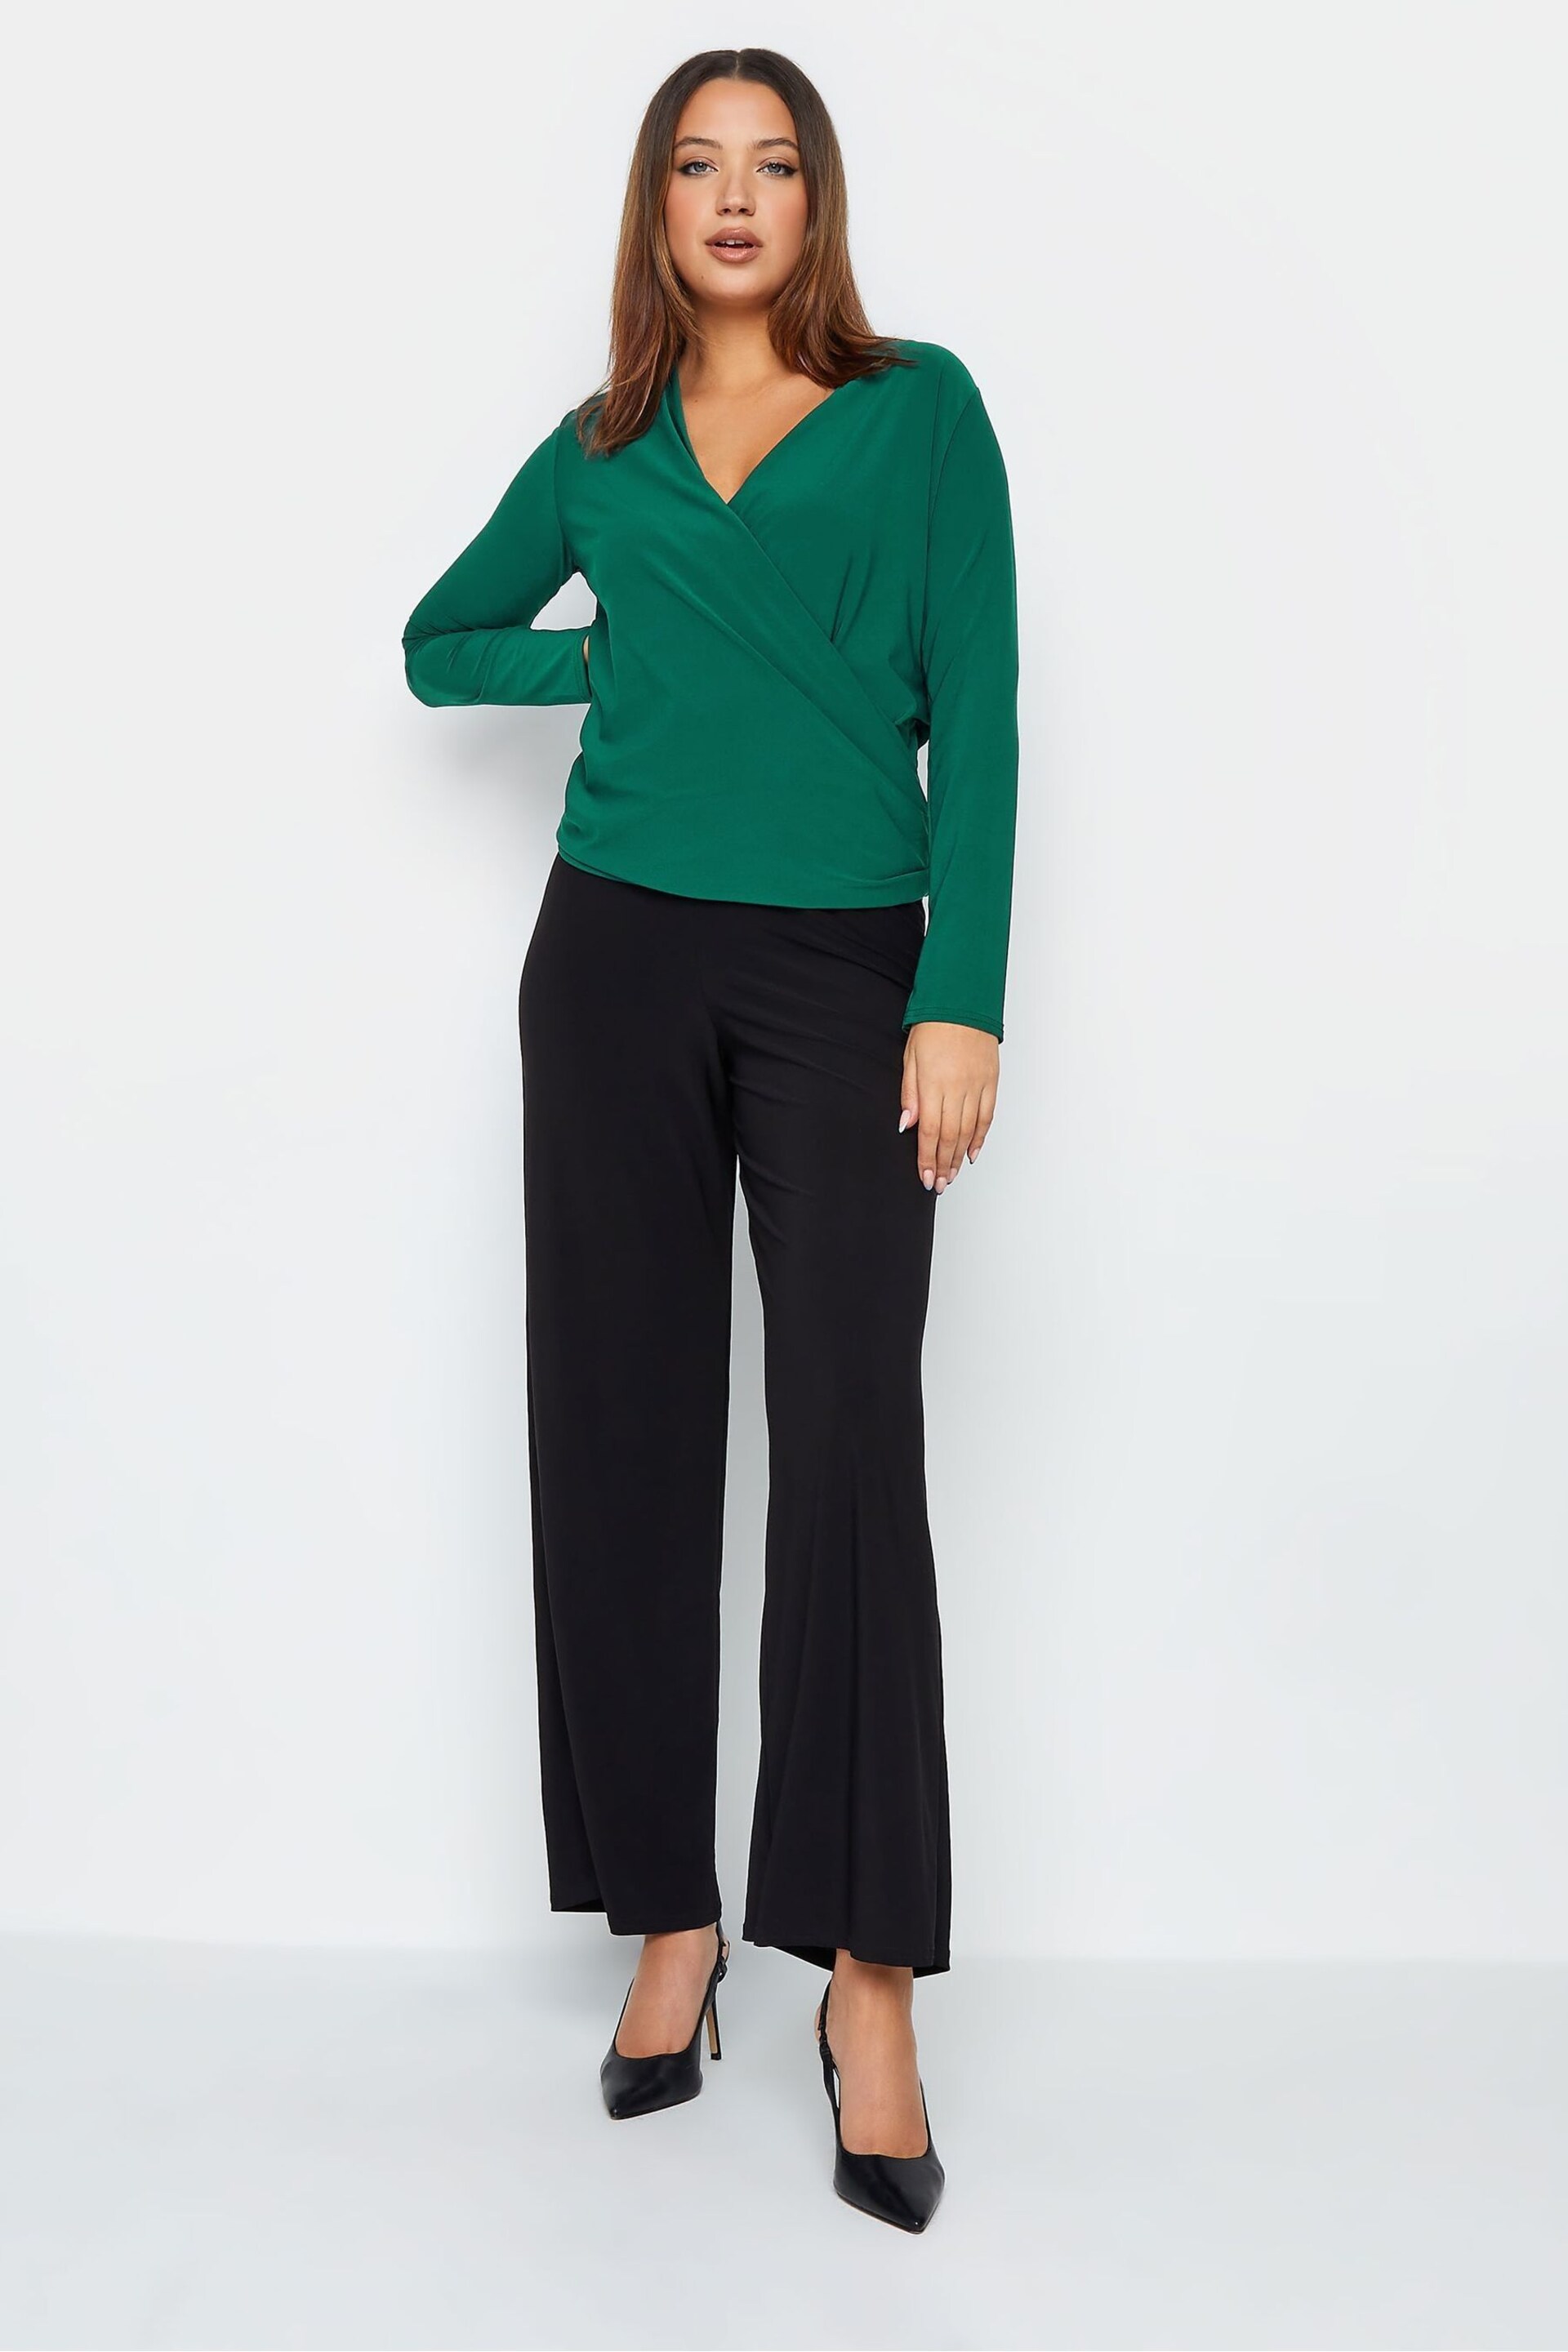 Long Tall Sally Green ITY Wrap Top - Image 2 of 4